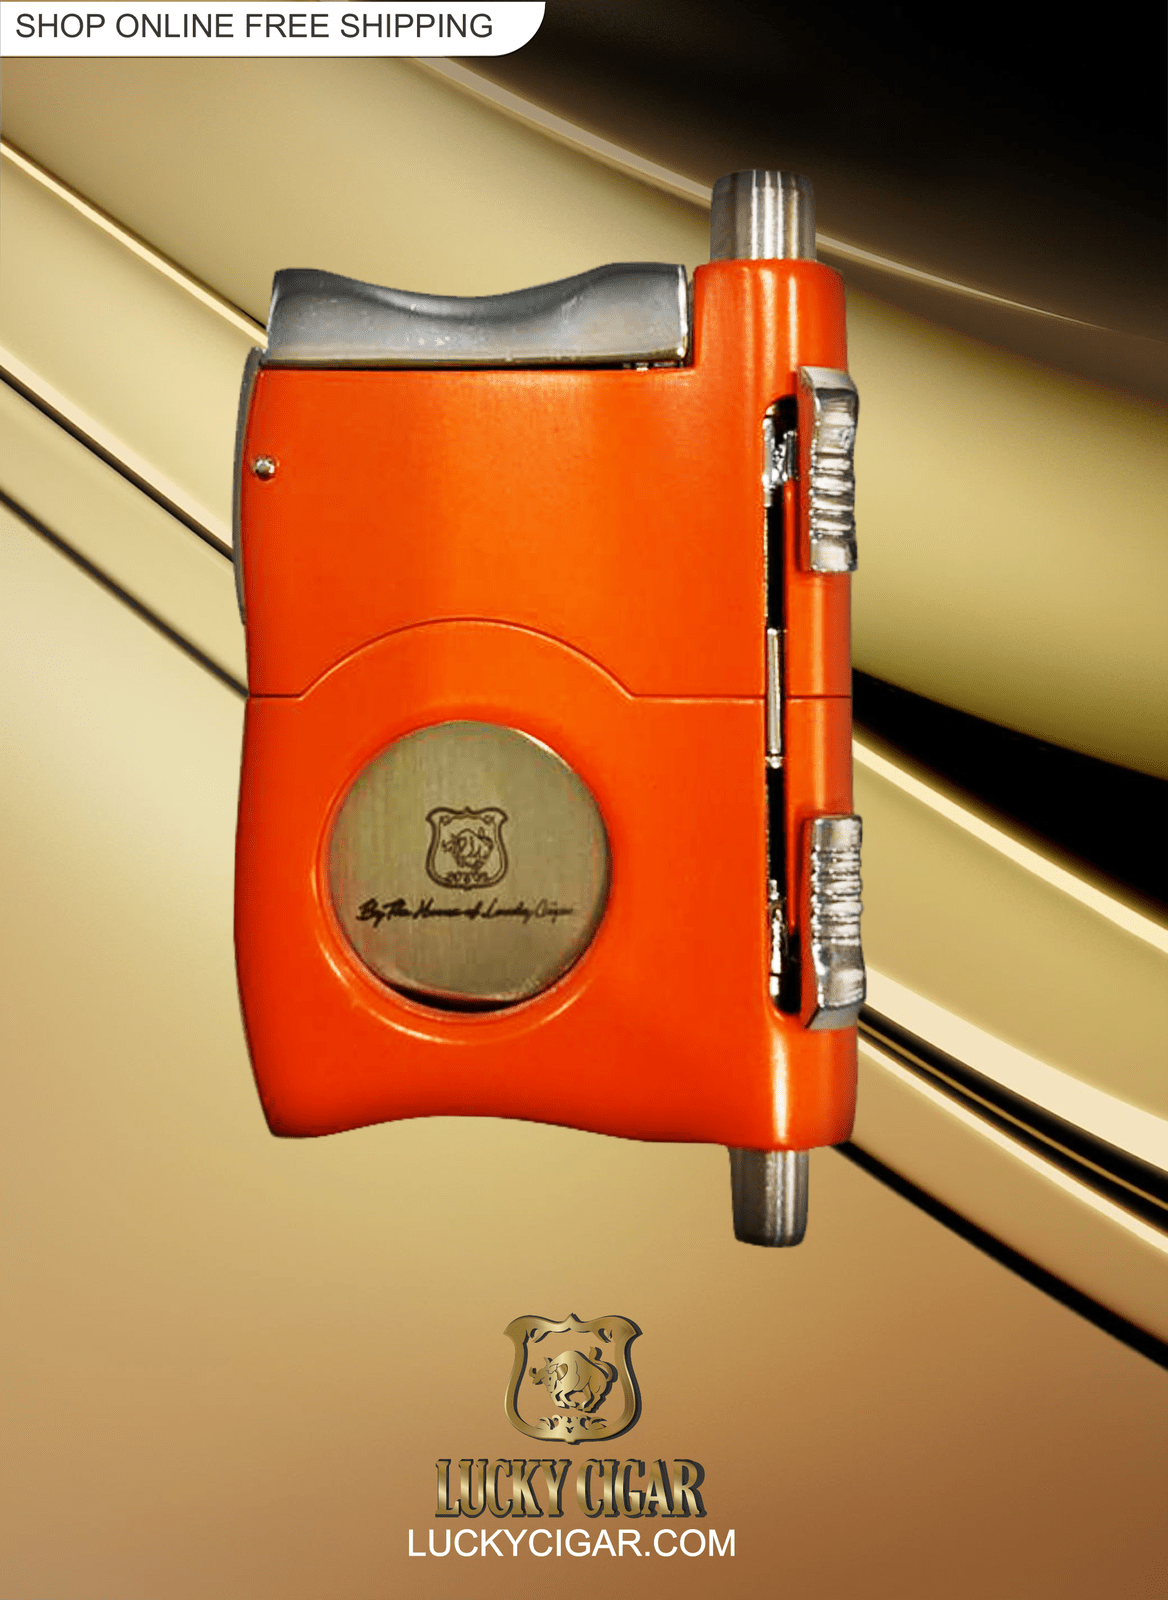 Cigar Lifestyle Accessories: Cigar Cutter with Standard, Punch in Orange